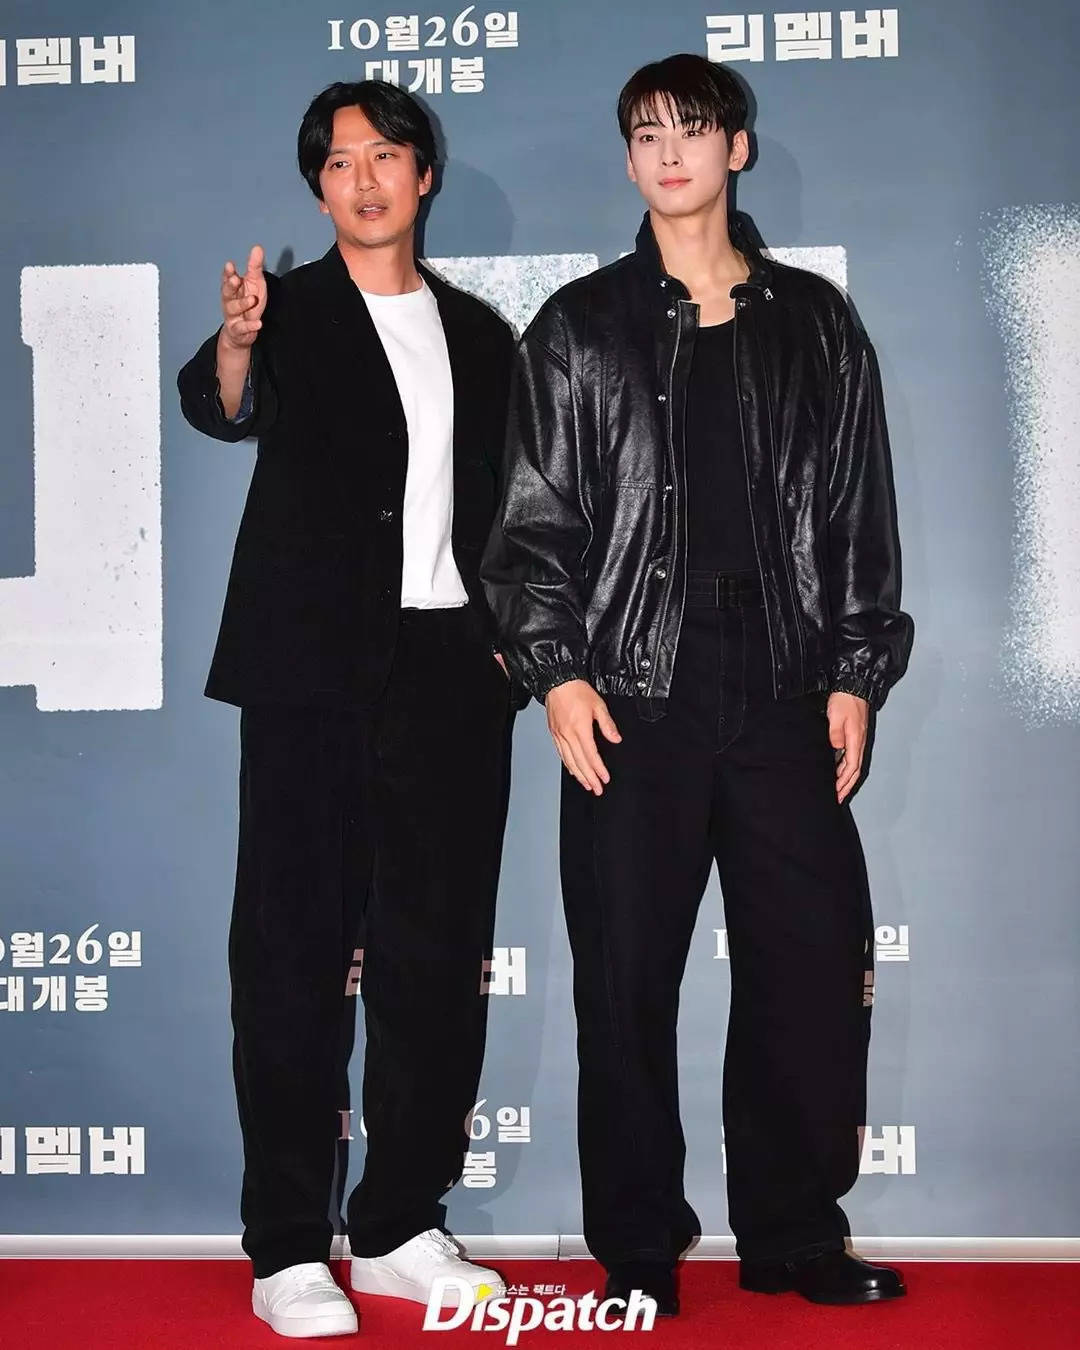 ASTRO's Cha Eunwoo And Actor Nam Joo Hyuk Wore The Same Designer Jacket,  But Served Completely Different Vibes - Koreaboo